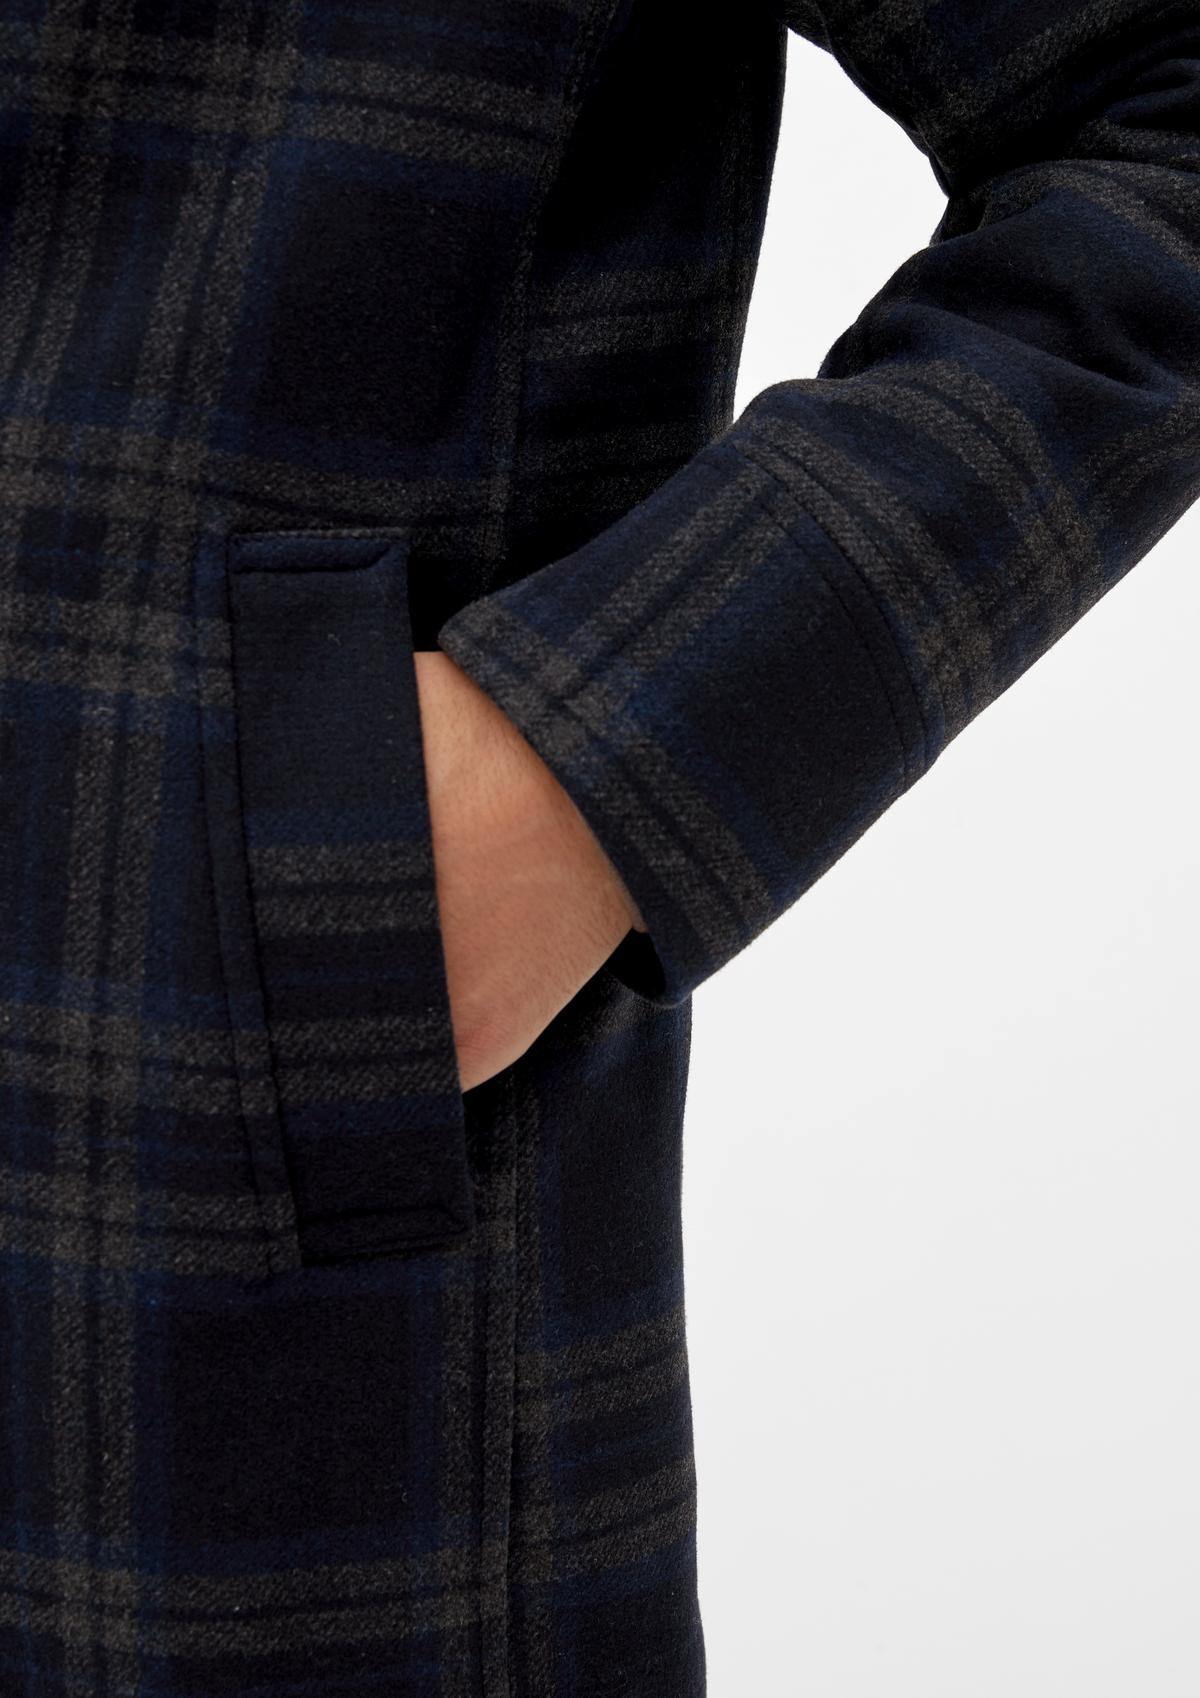 s.Oliver Check jacket with a lapel collar